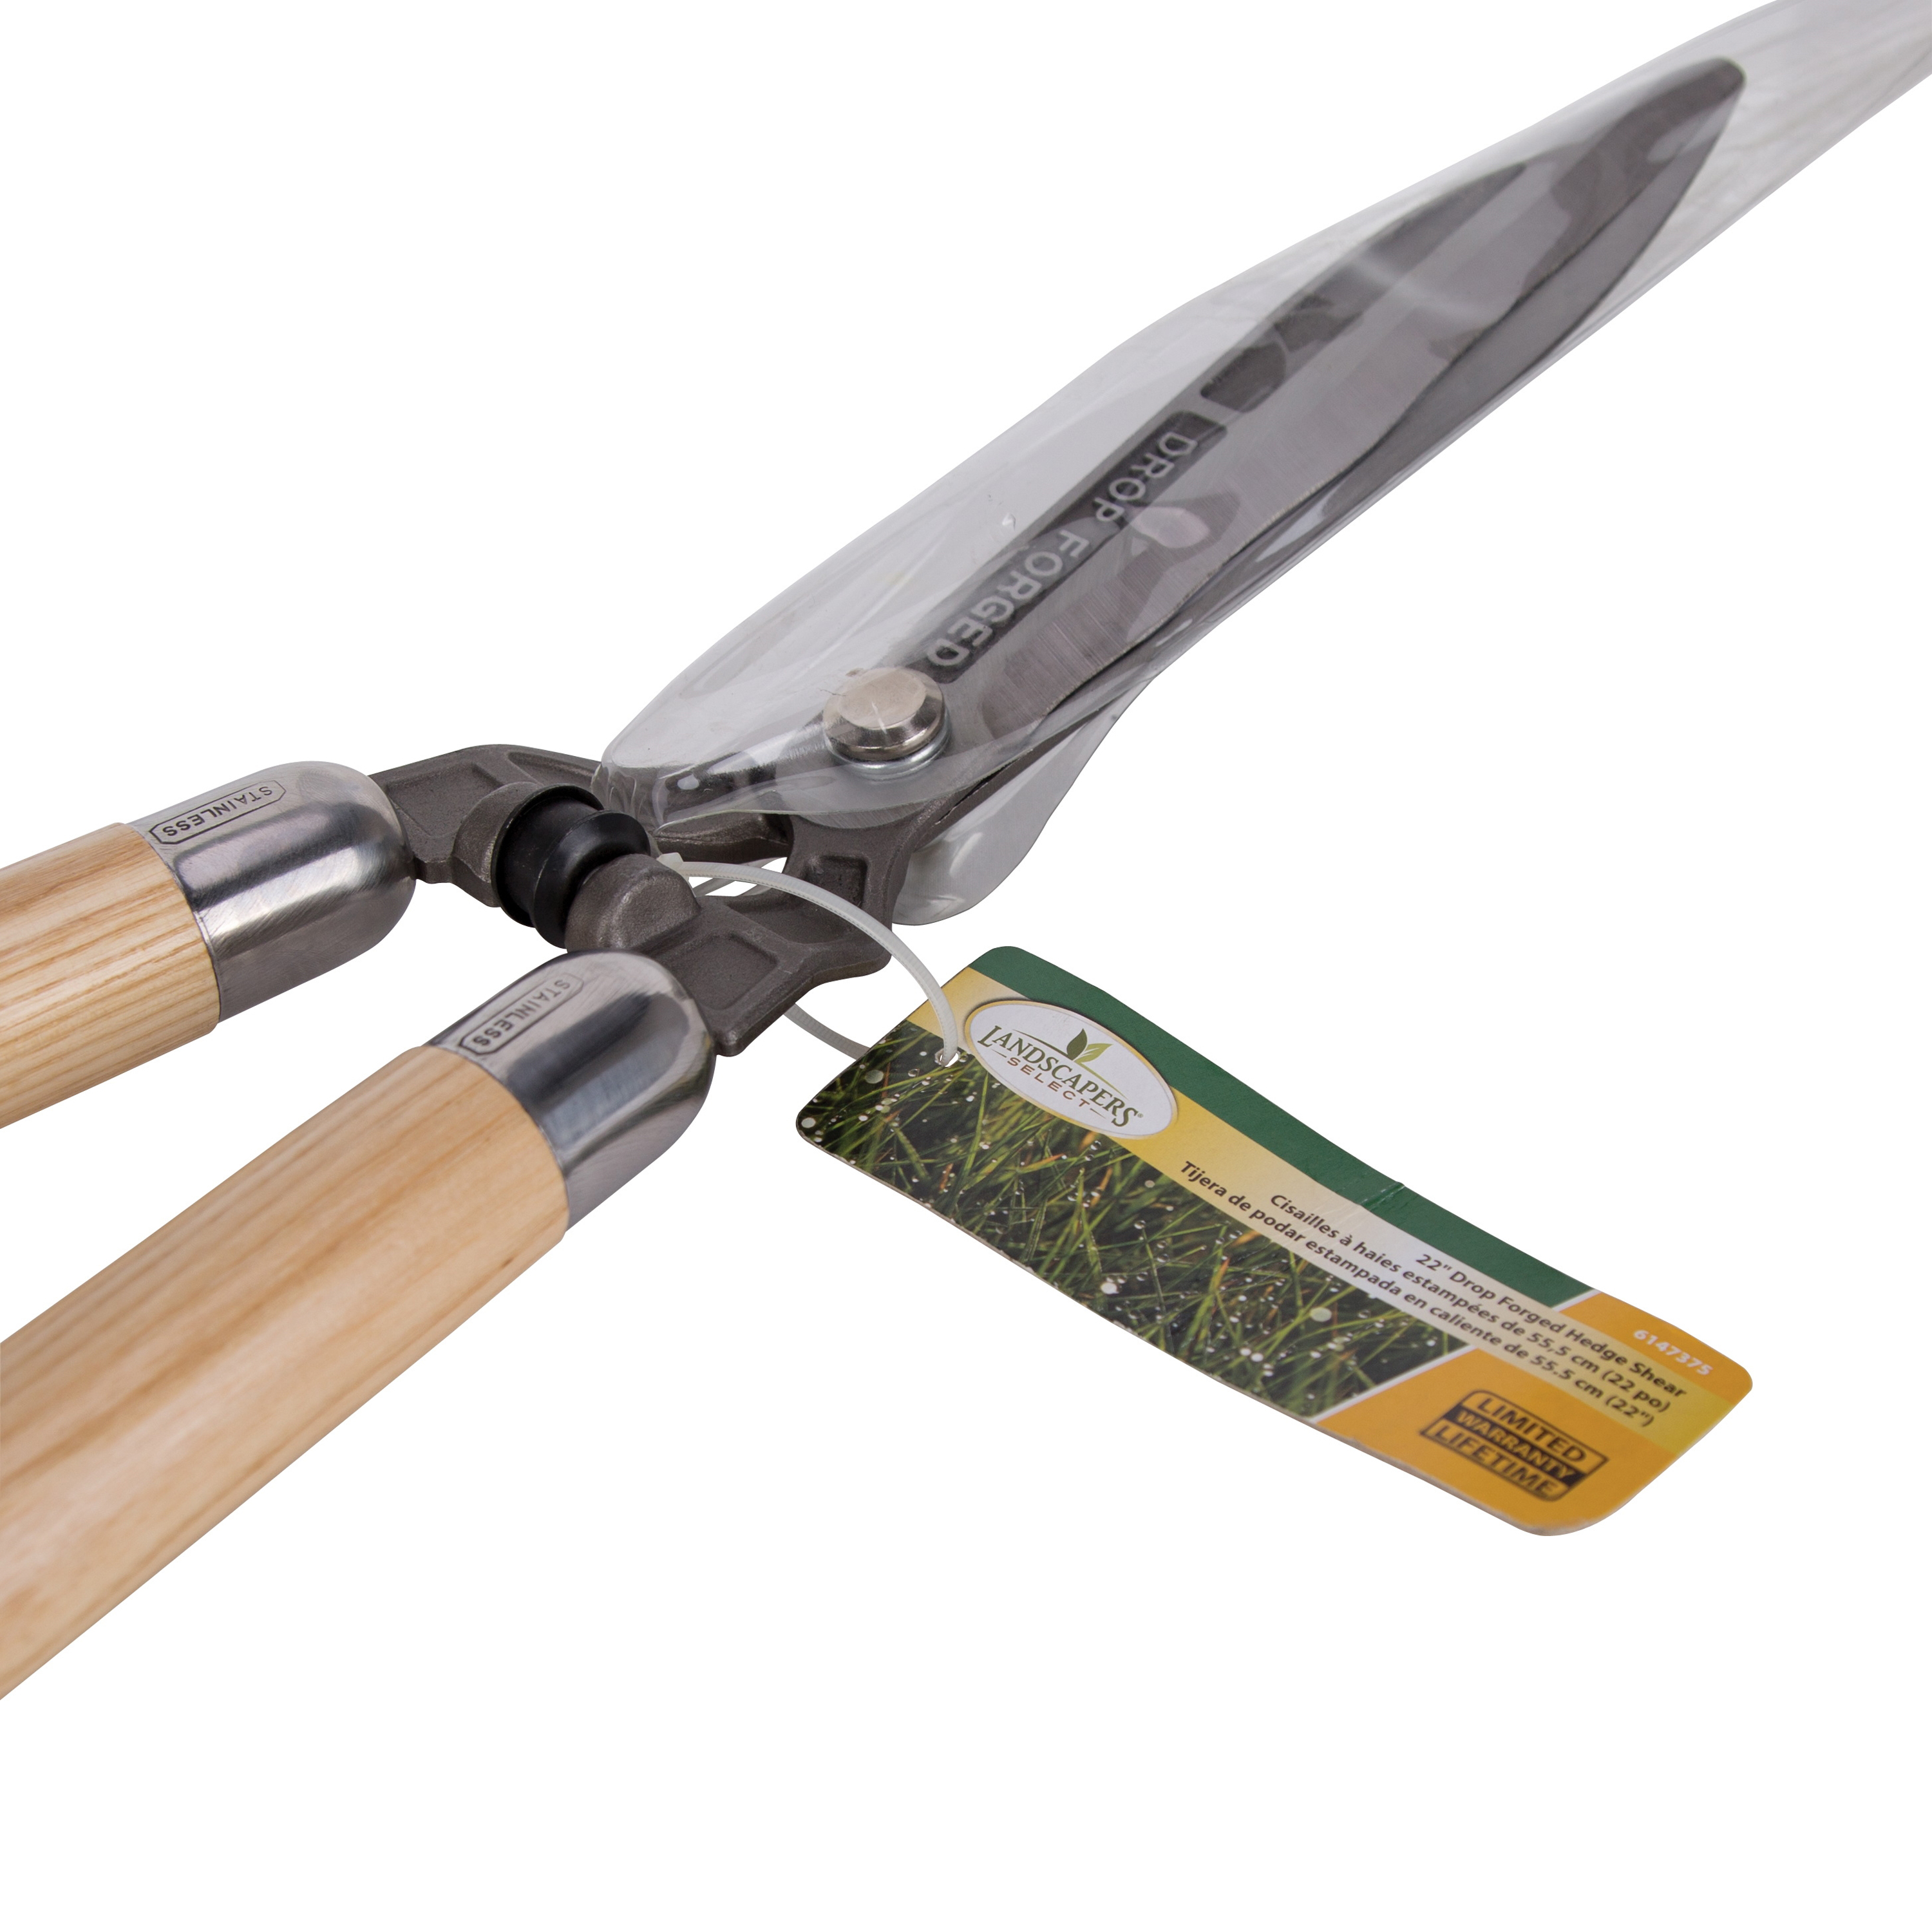 Landscapers Select 6147375 Forge Hedge Shear, Straight with Wave Curve Blade, 8-1/2 L Blade, Steel Blade, 22 in OAL - 2